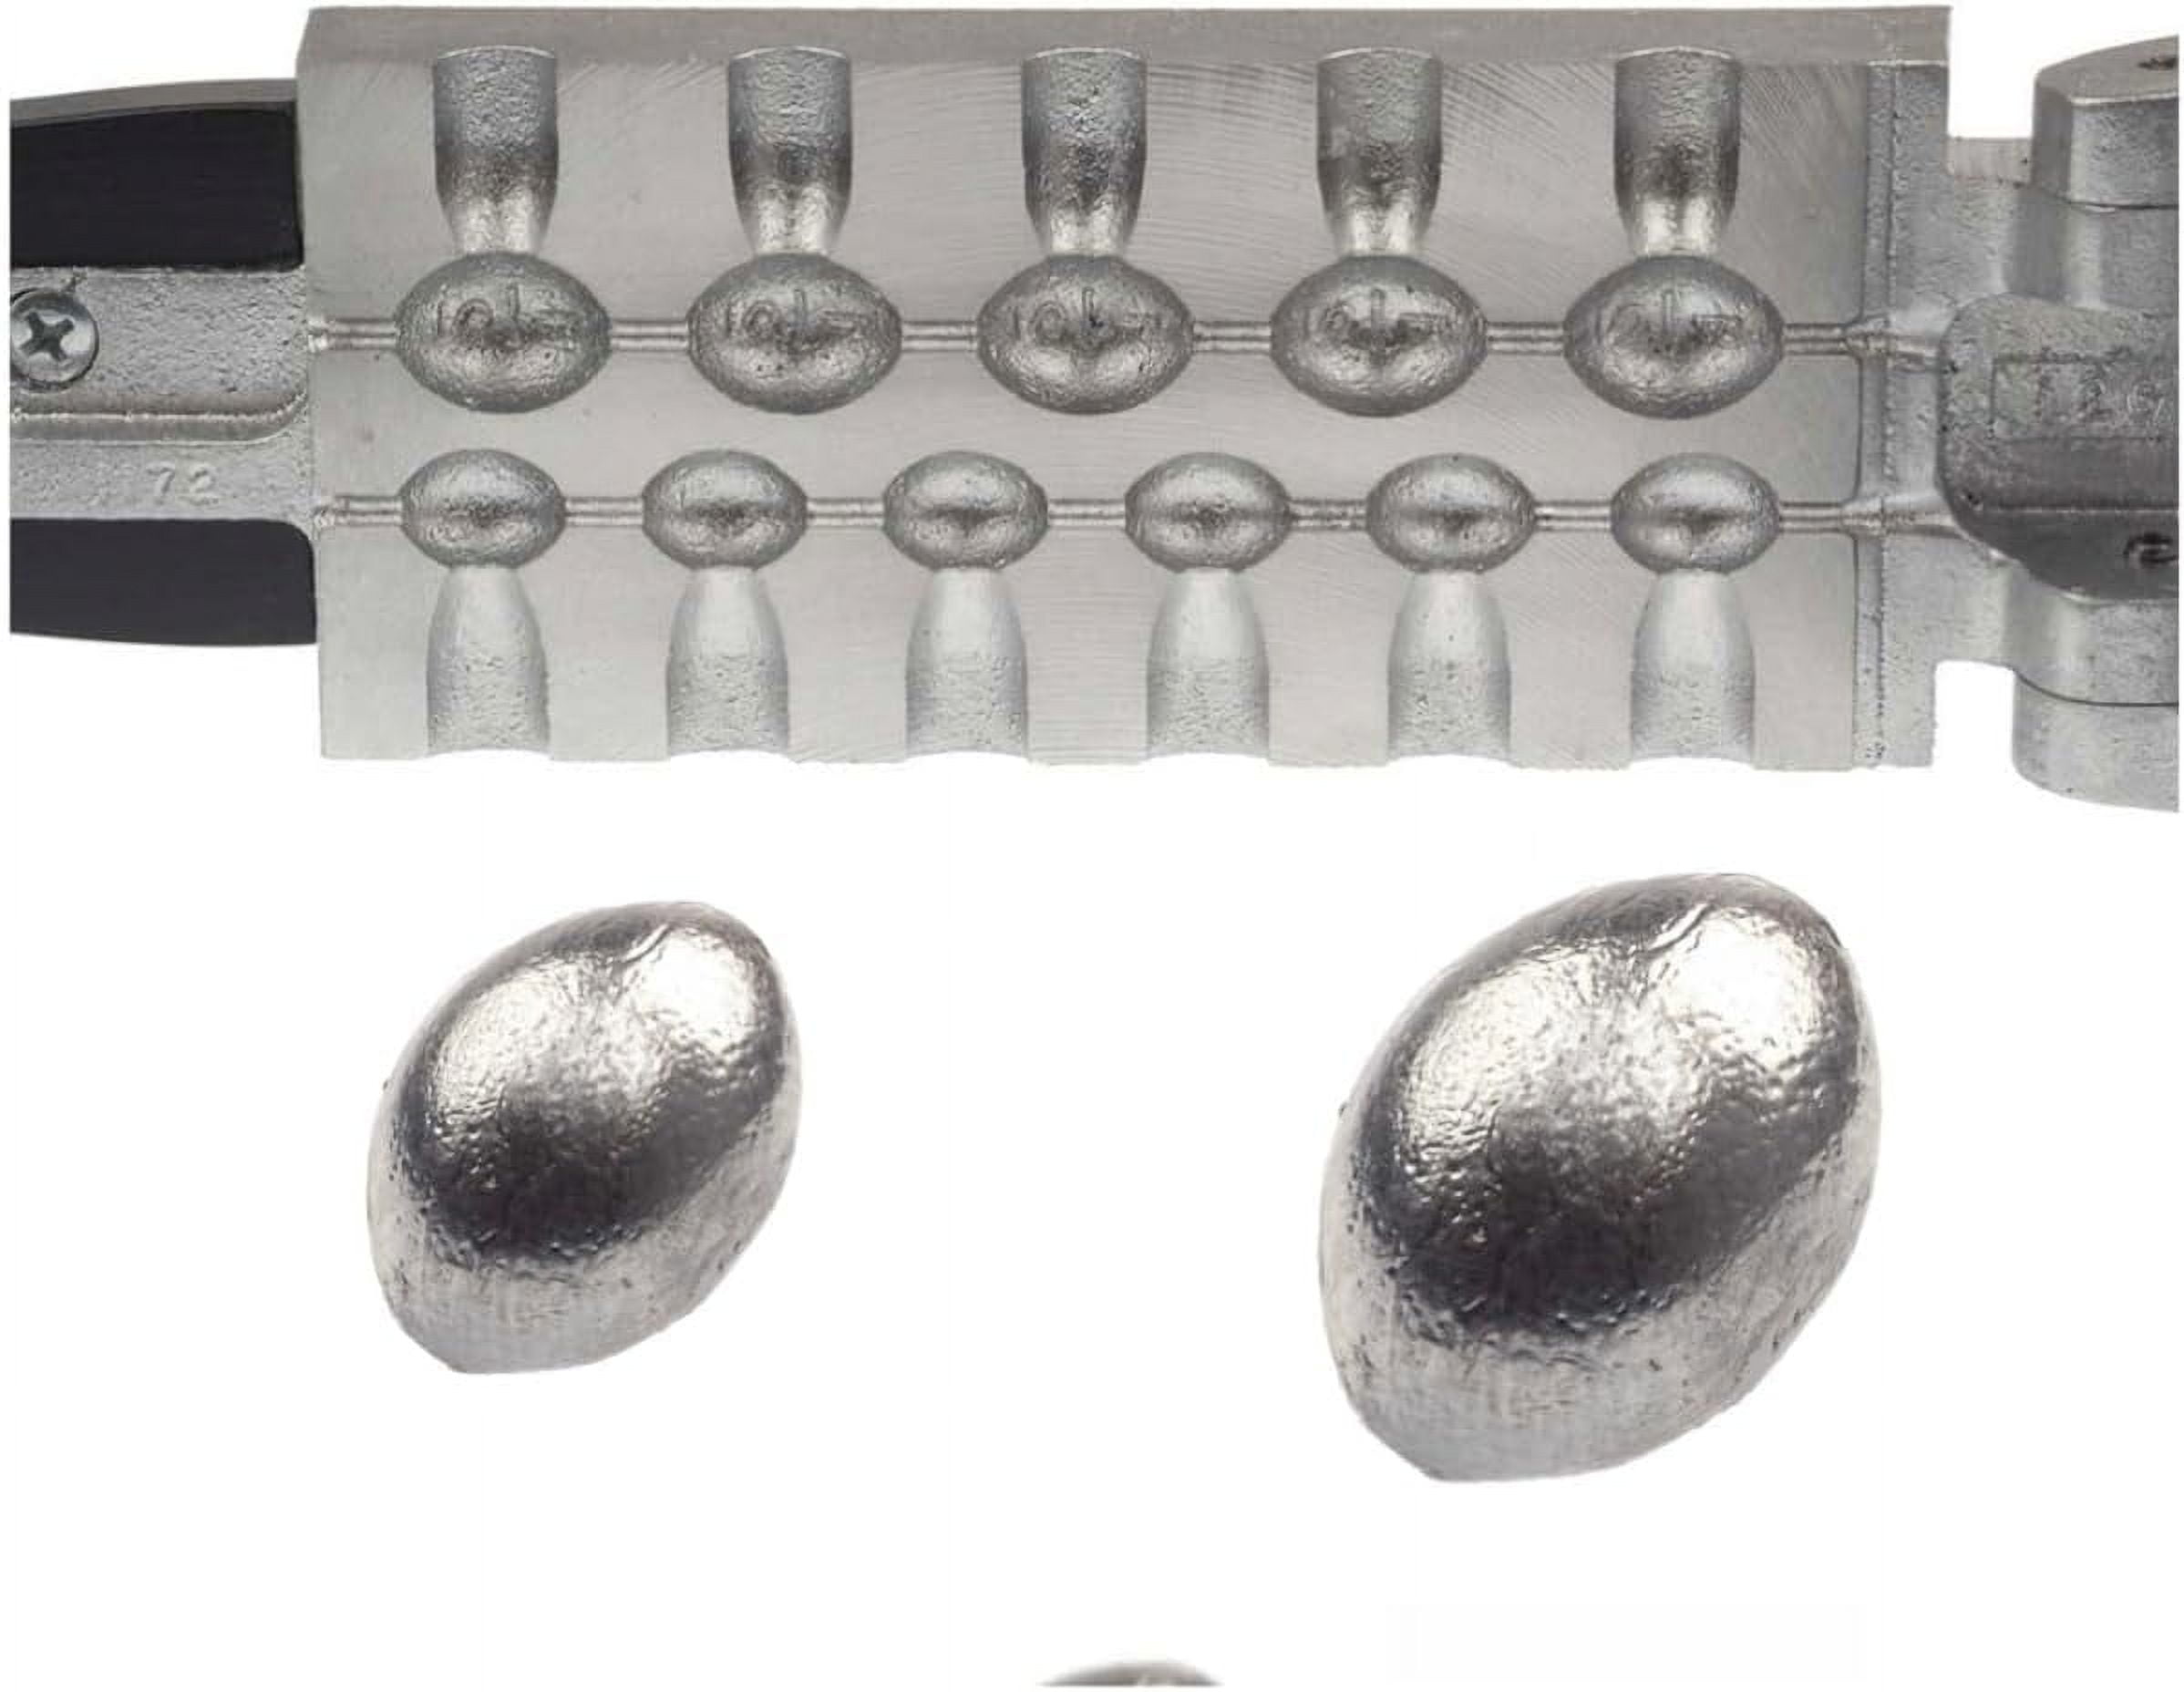 Egg Sinker Mold 1/4, 1/2 Oz (11 Cavity Total) One Pull Pin Included Do It  Mold 1172 EG-14- Casts 7 1/4 Oz And 7 1/8 Oz Egg Sinkers 